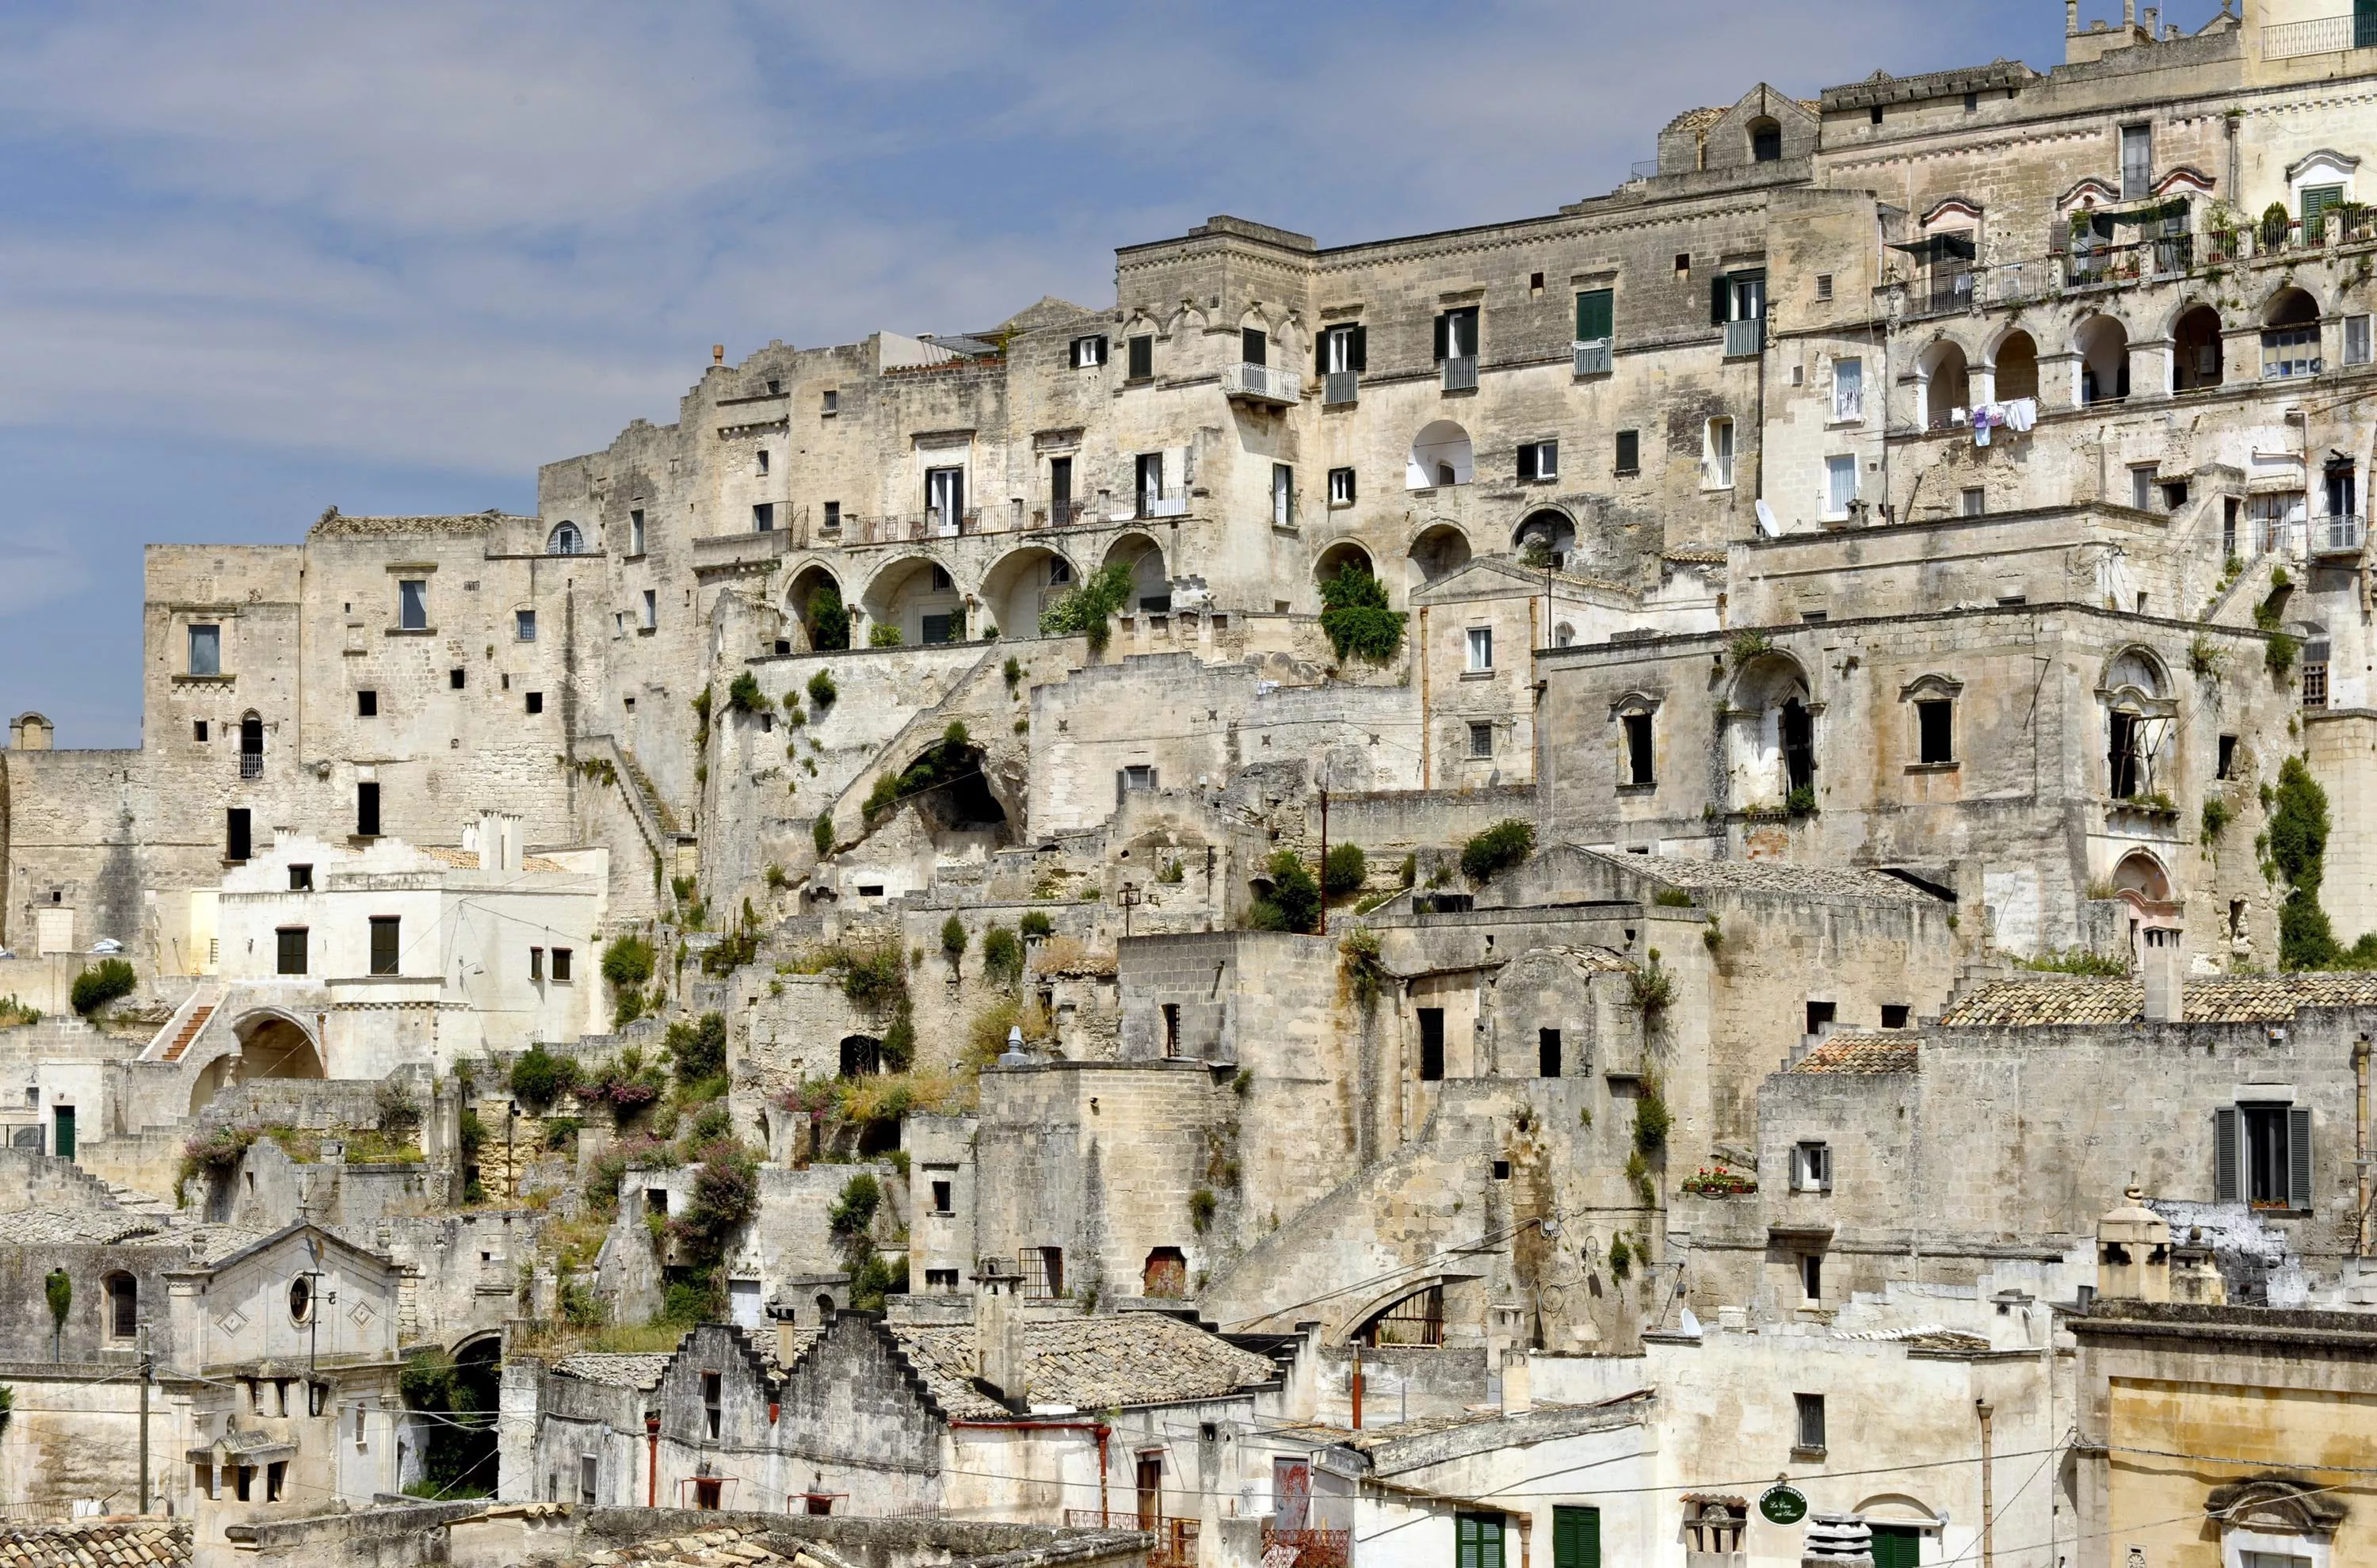 Sassi di Matera in Italy, Europe | Architecture - Rated 4.5